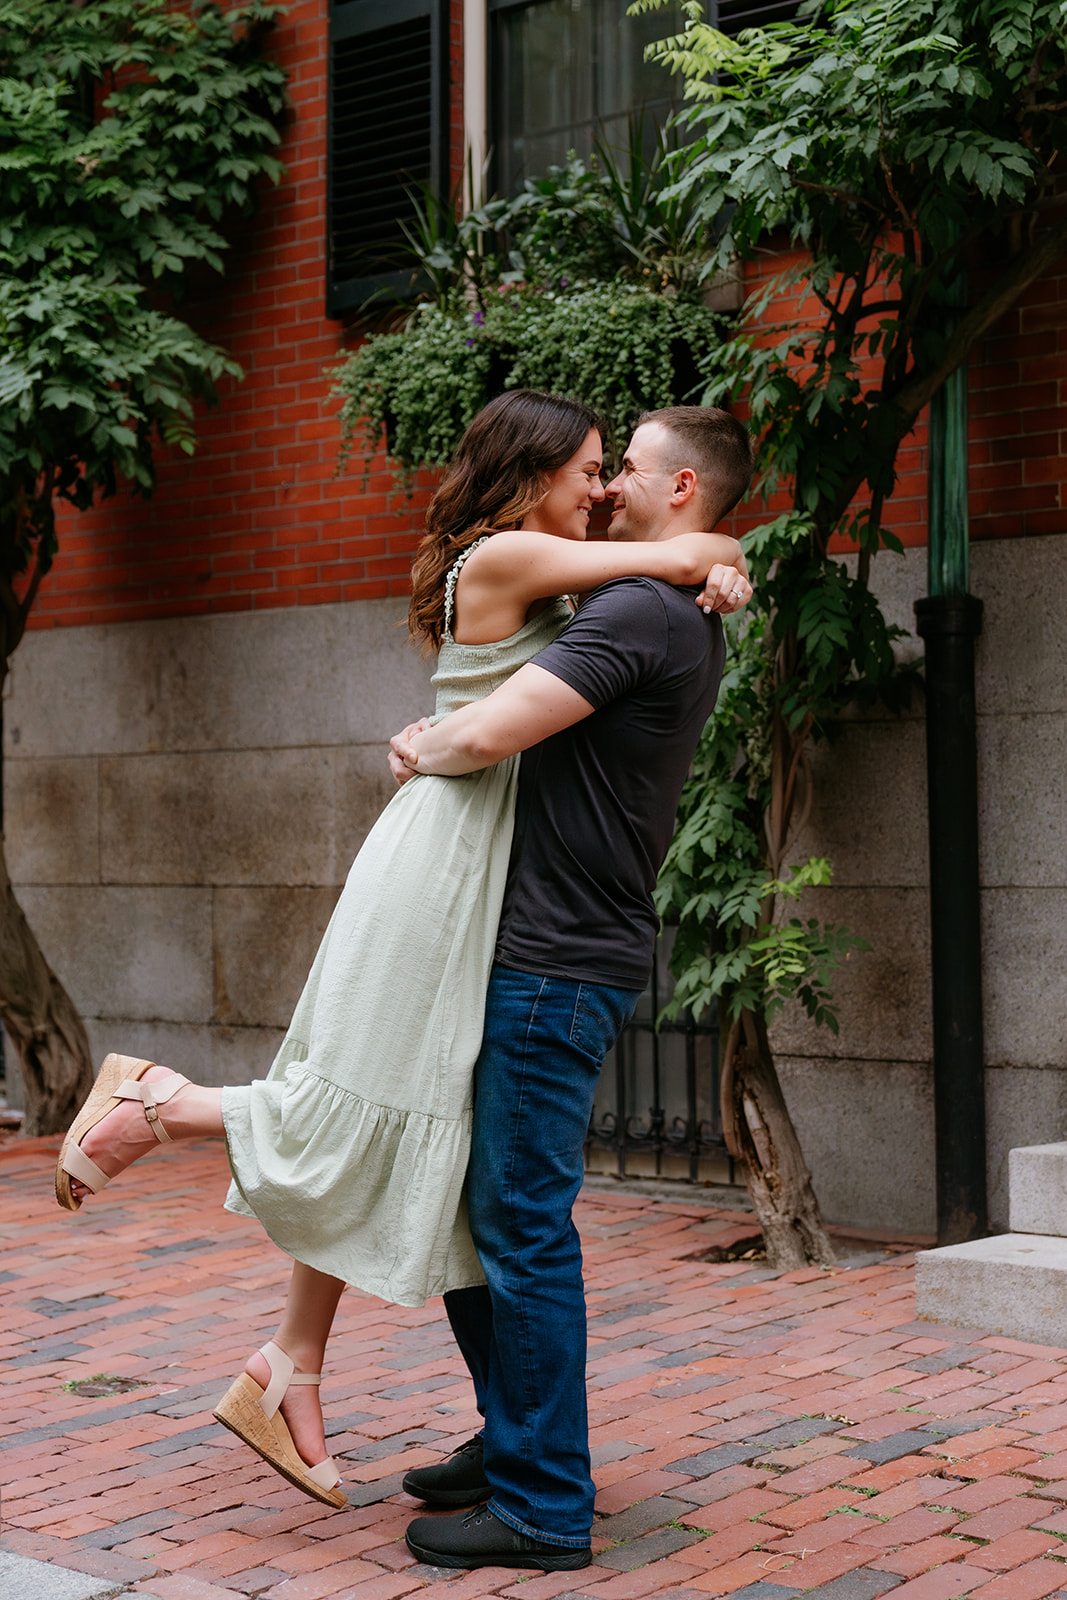 A couple embracing and smiling at each other on a brick sidewalk with greenery and a red brick building in the background on the streets of beacon hill 